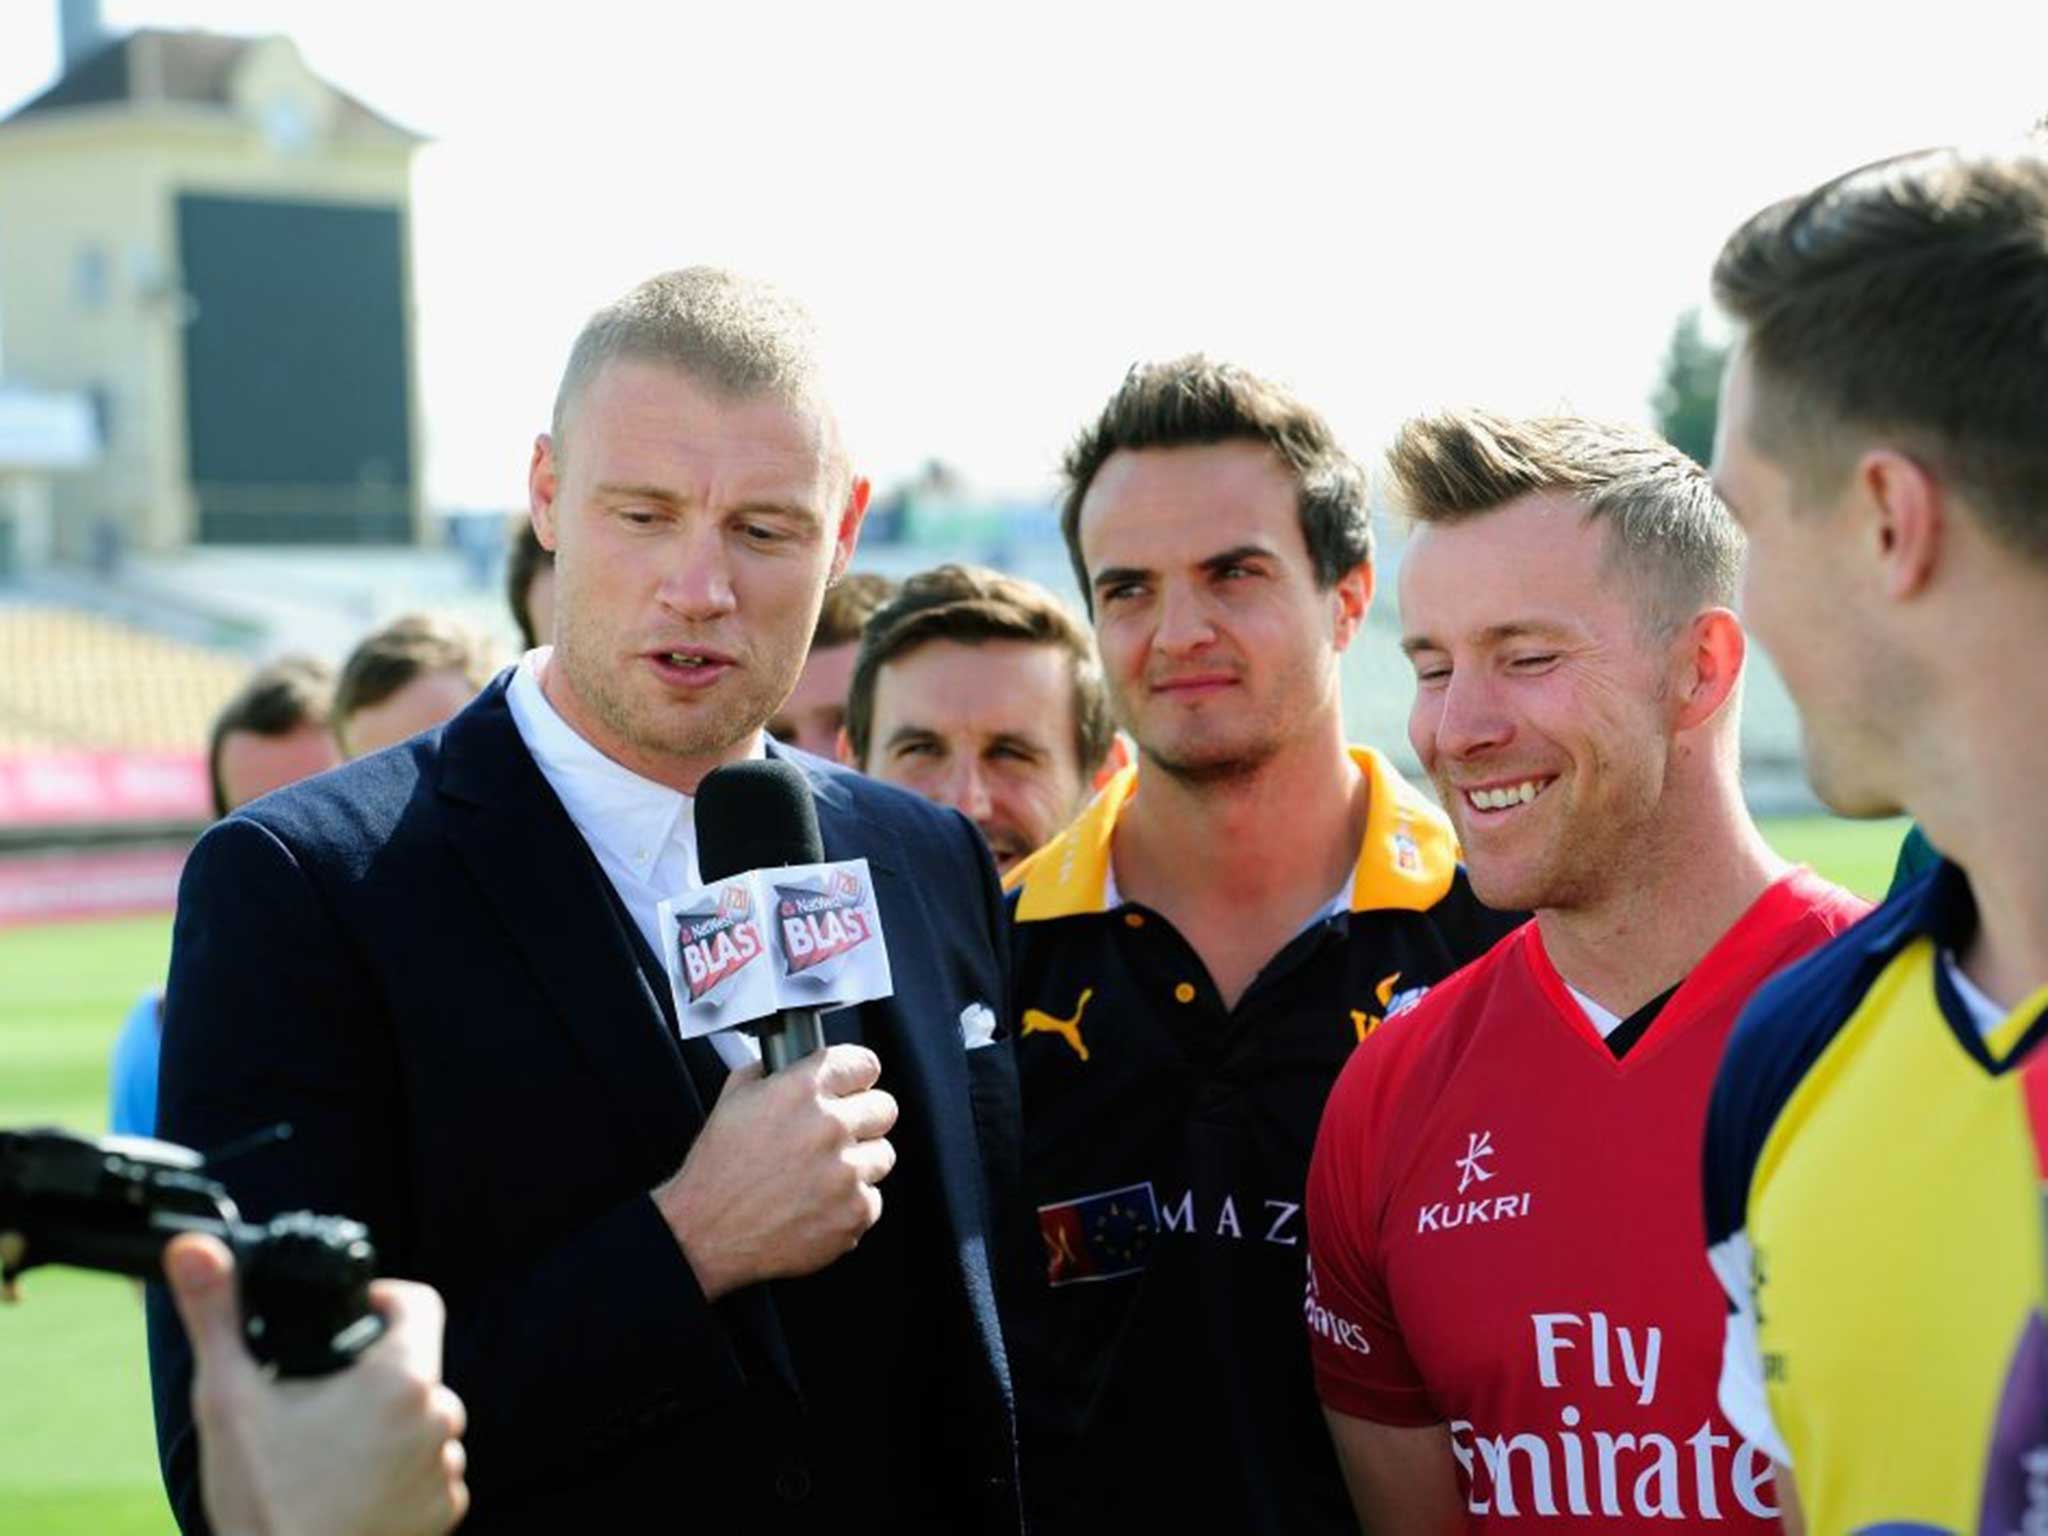 Andrew Flintoff said one thing he got right was to pick Alastair Cook in his first Test as England captain